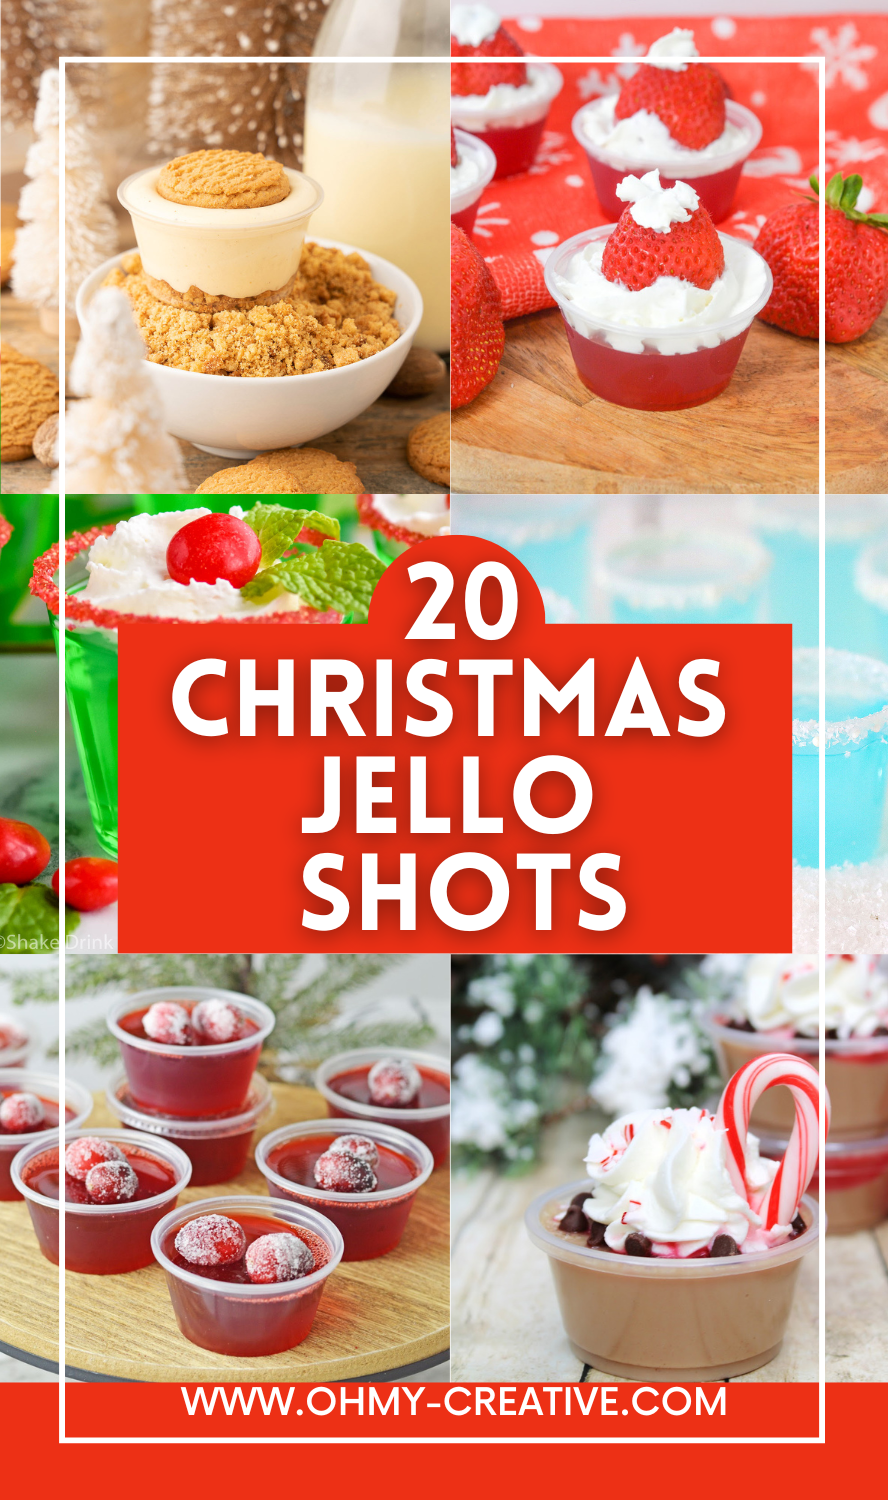 20 creative Christmas jello shots in holiday flavors.